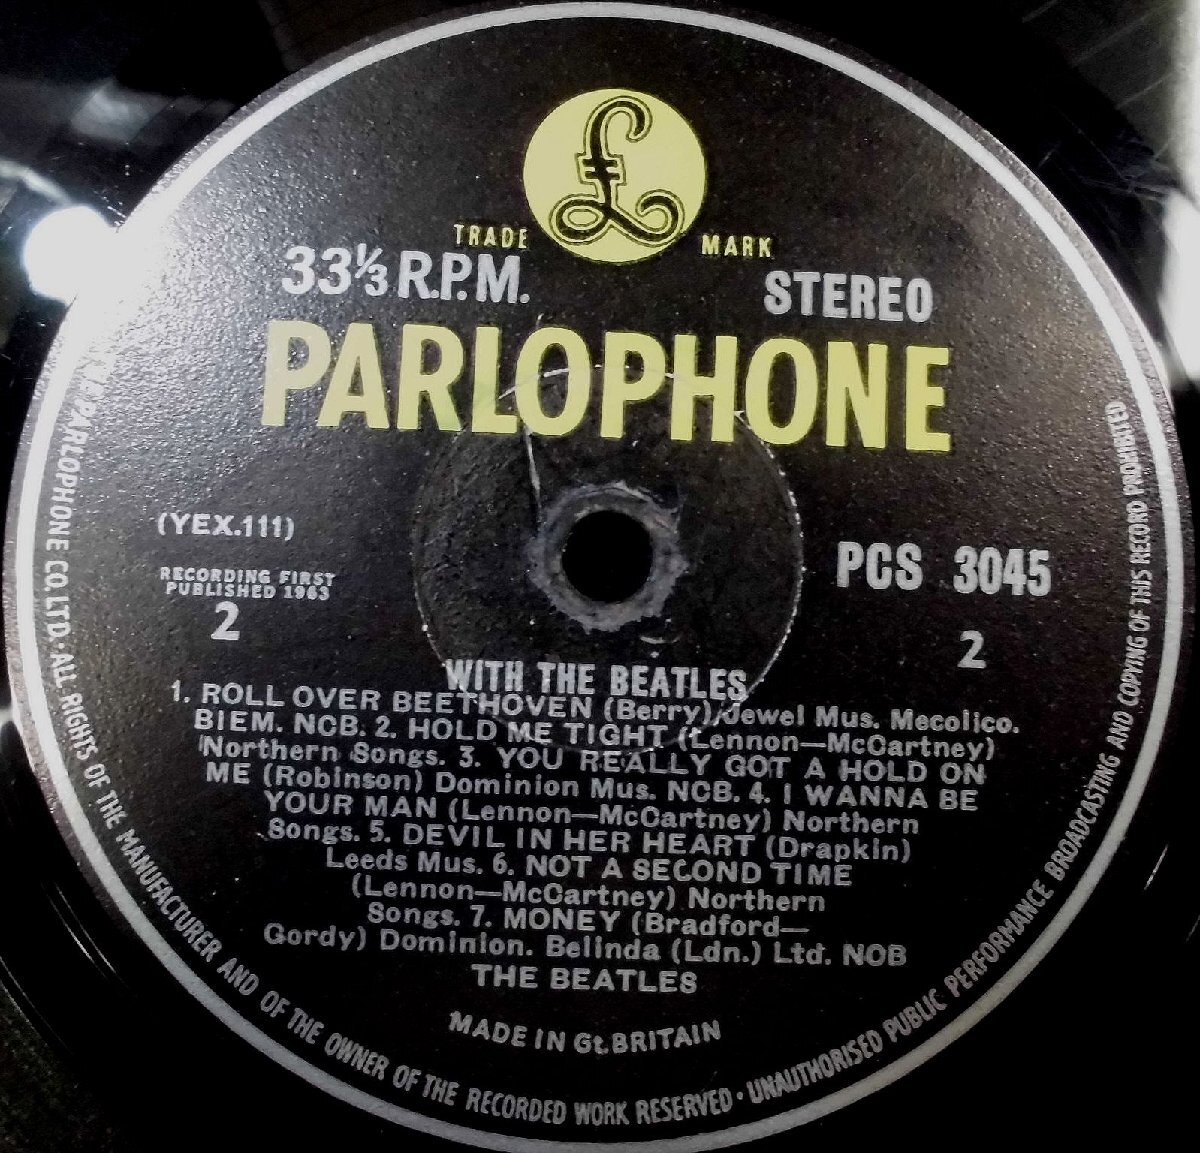 *UK-Parlophone original Stereo,w/Large-Logo,1P: 3GO Pressing Copy!! The Beatles / With The Beatles